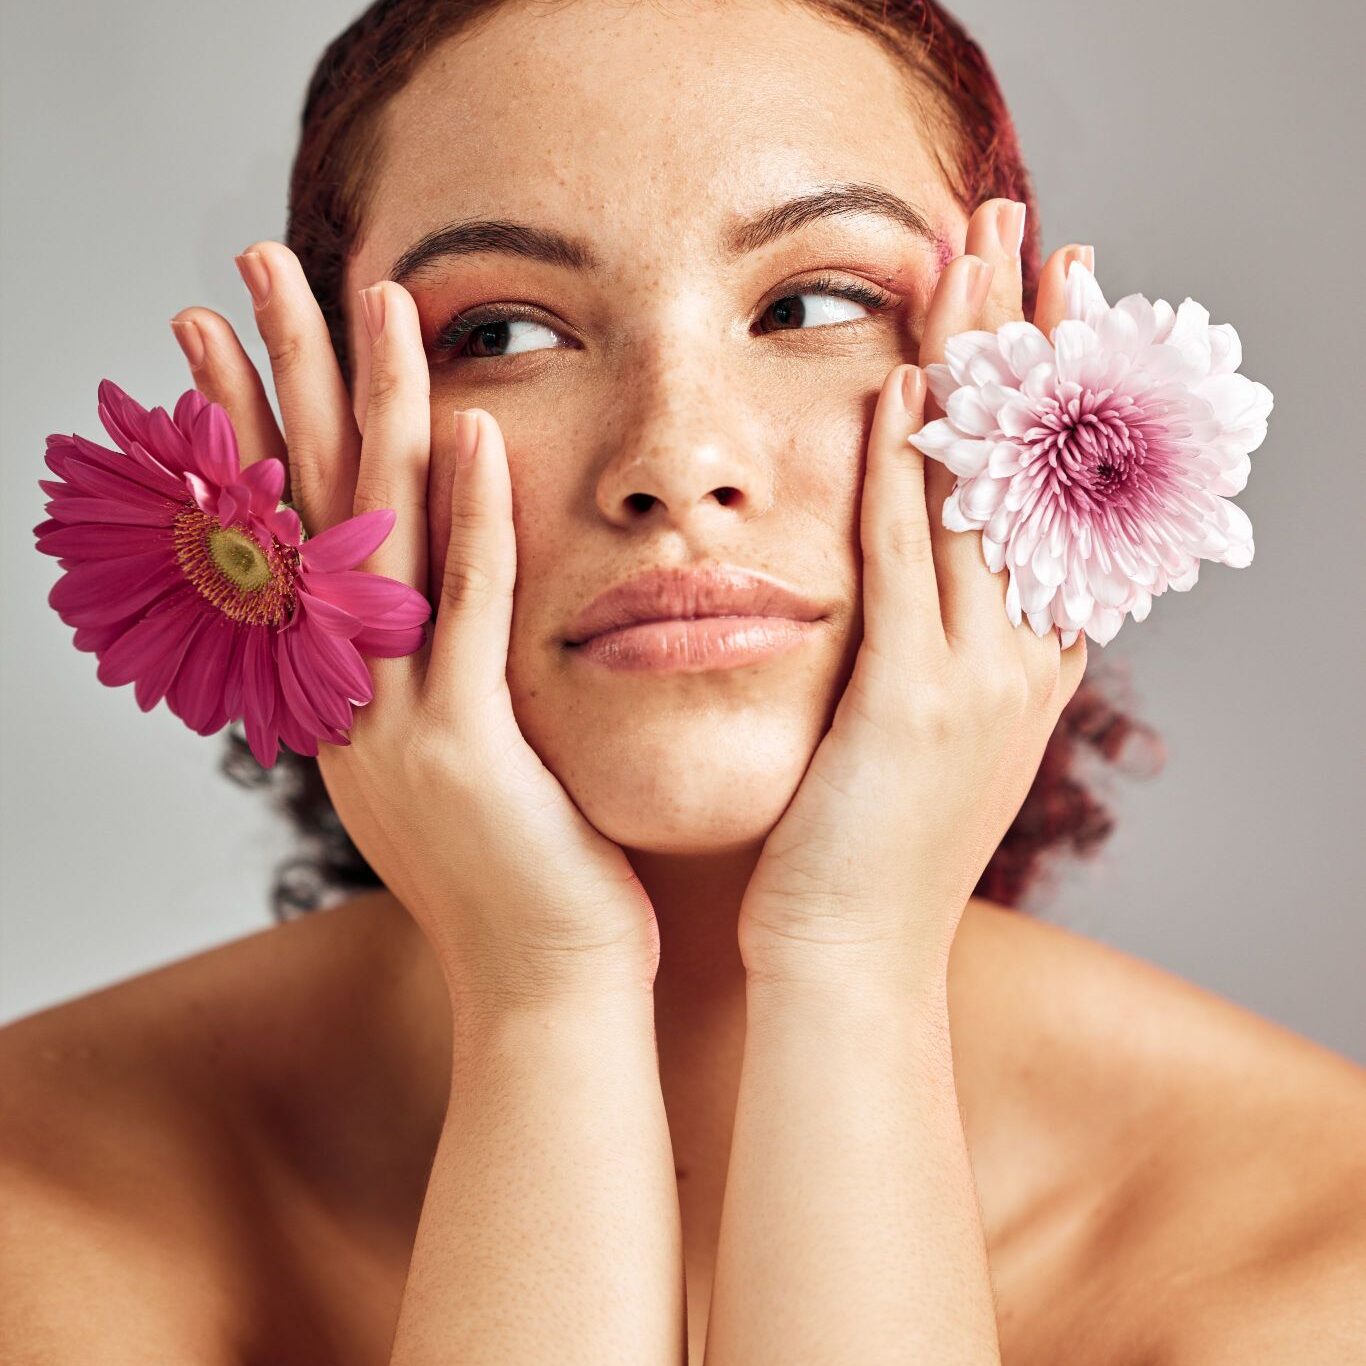 woman-studio-and-face-with-flowers-for-thinking-2023-01-31-23-35-39-utc